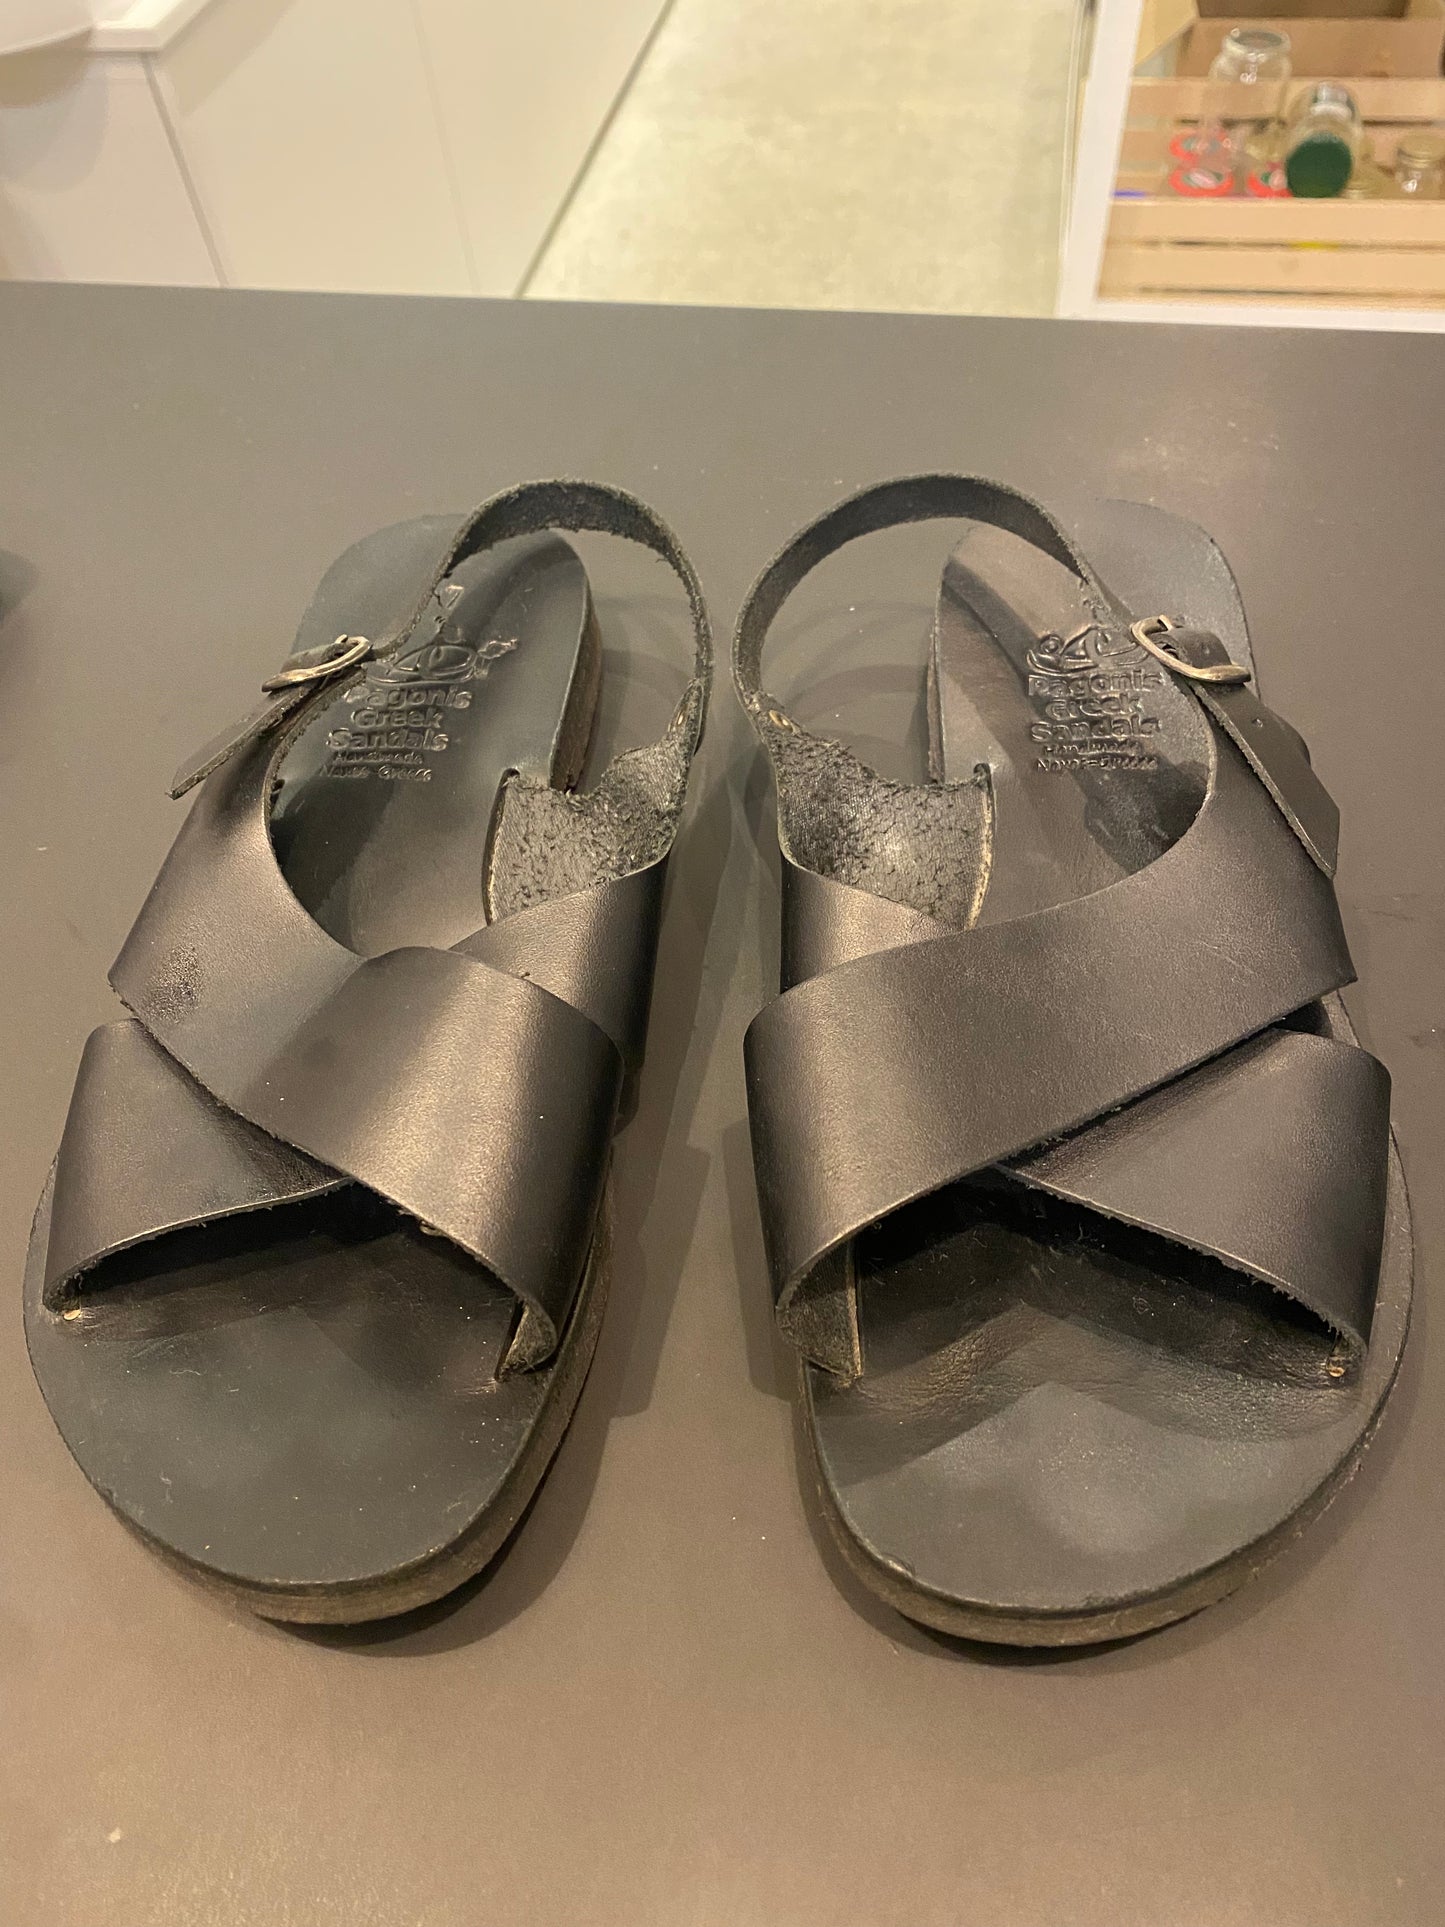 Consignment 3441-05 Pagonis Greek sandals sz 7